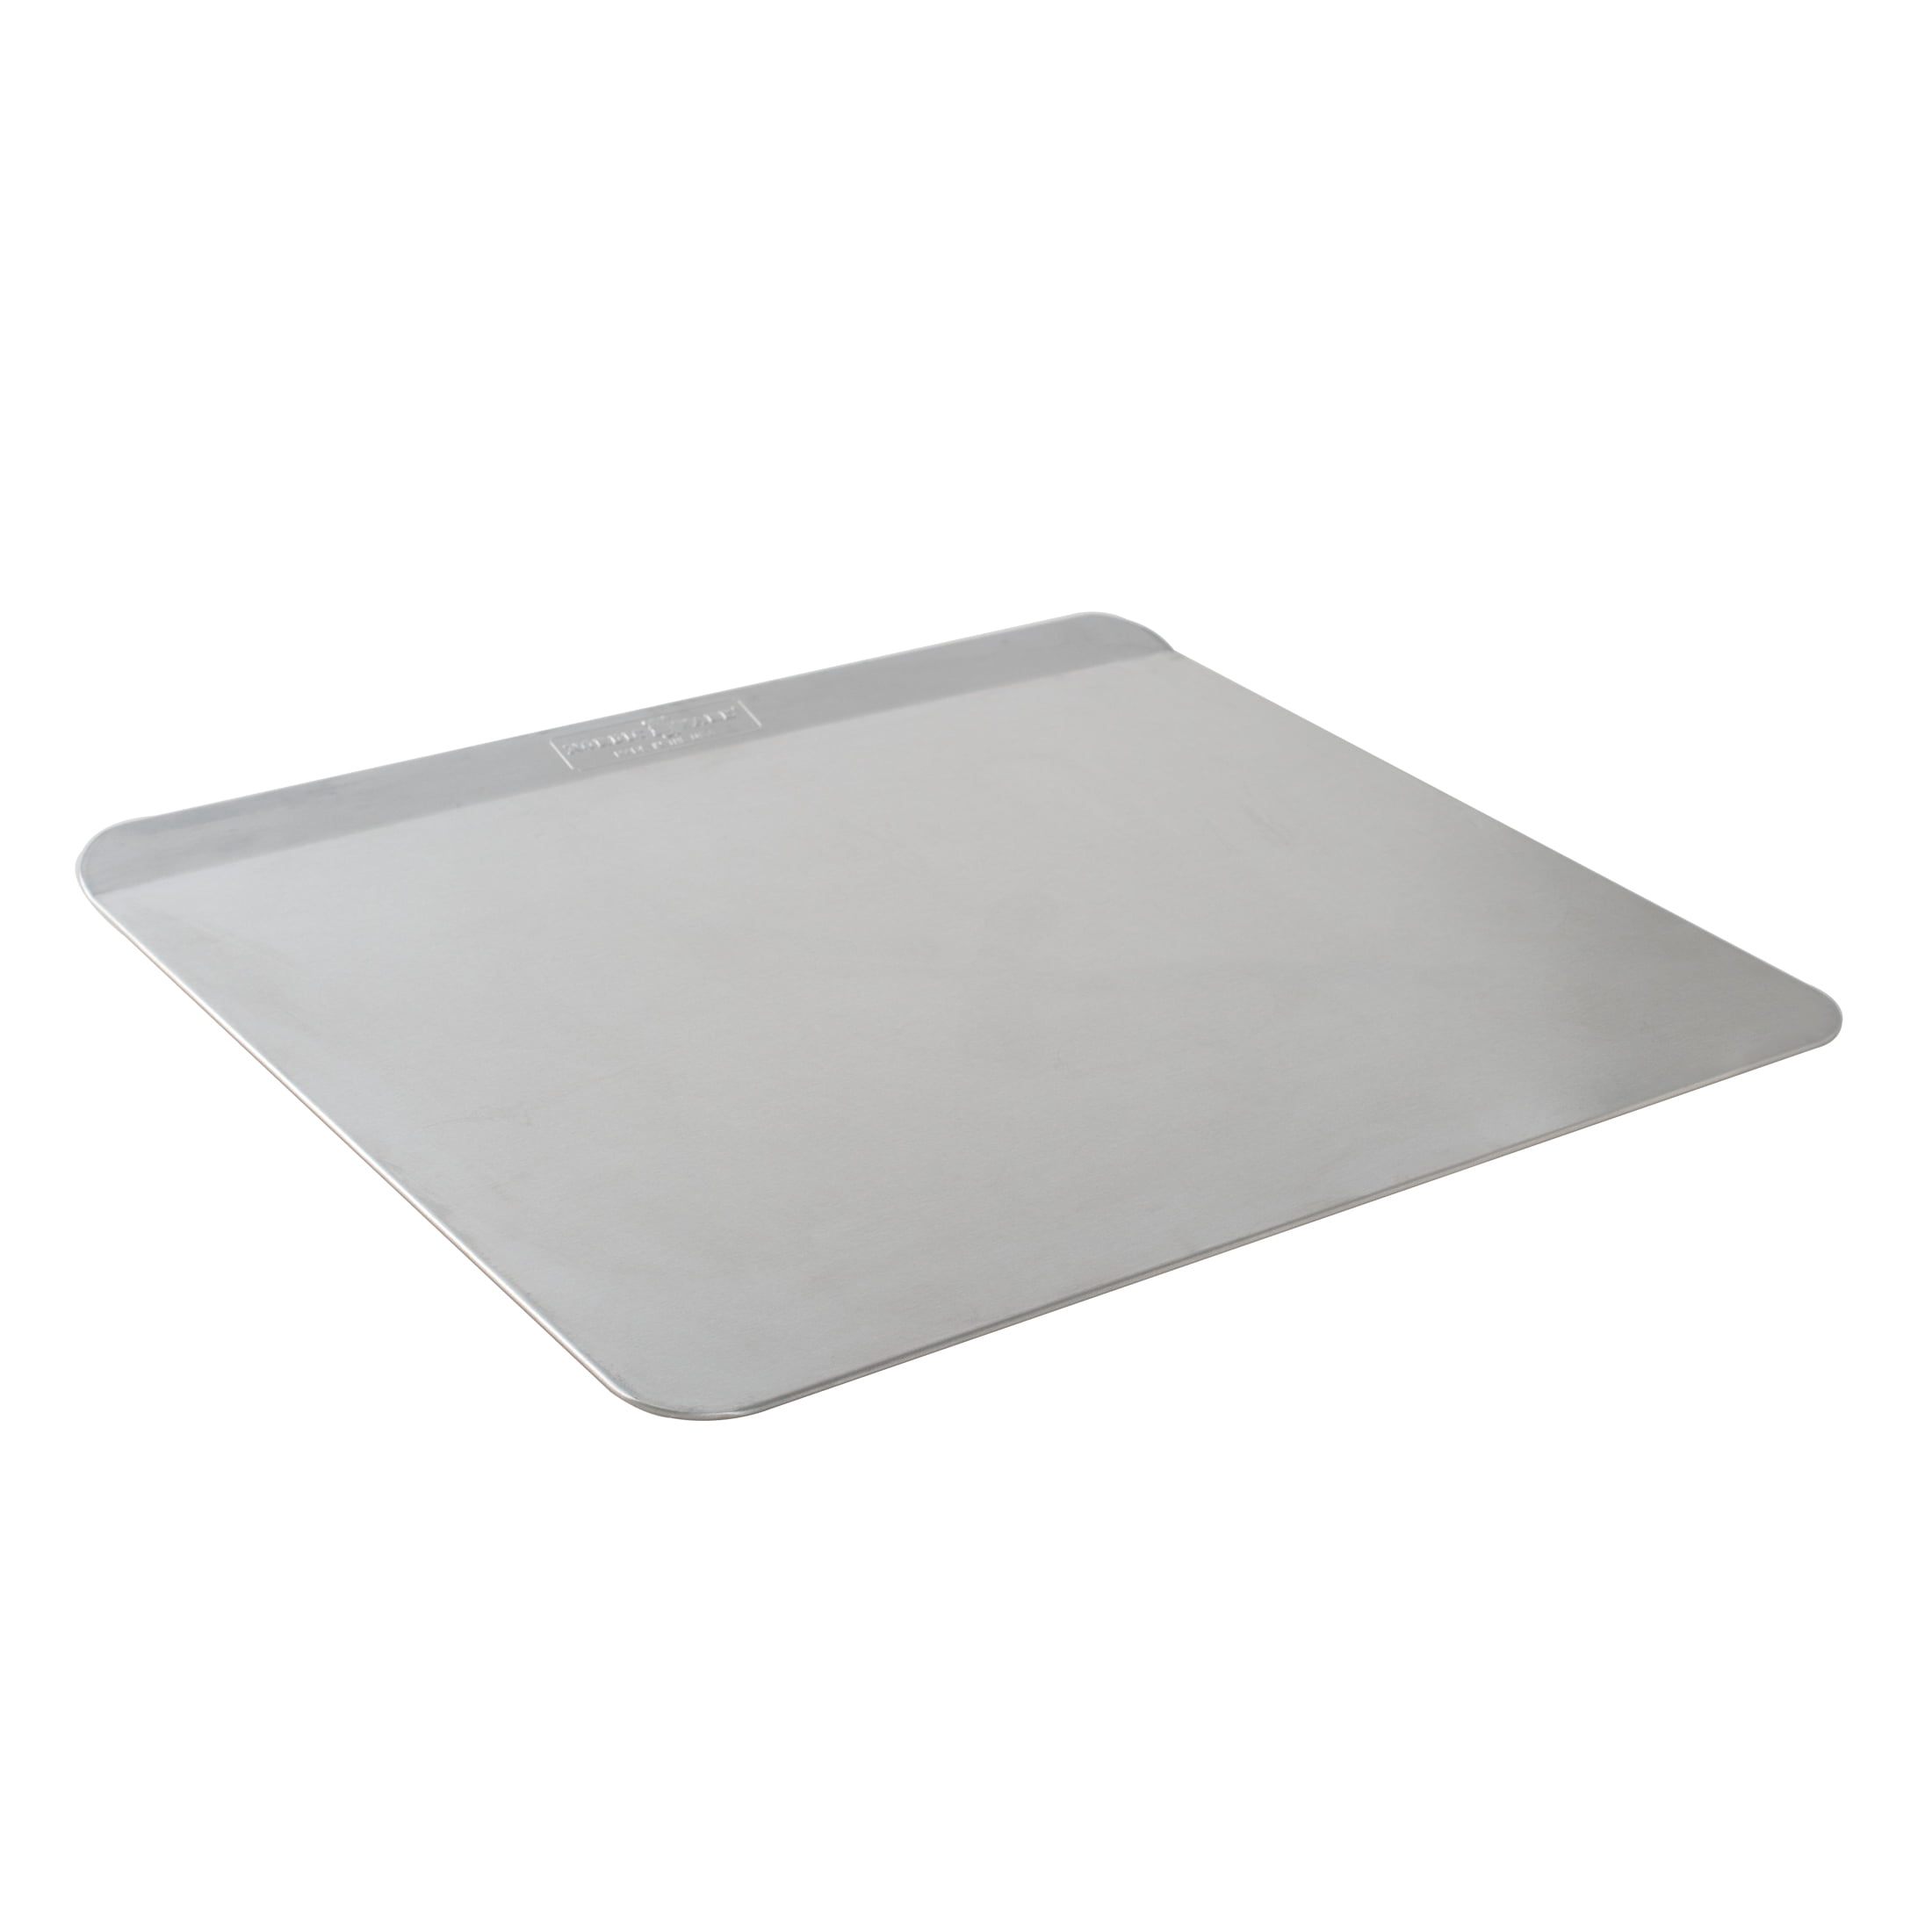 Nordic Ware Naturals Non-Stick Baking Sheet - Gold, 16.25 x 11.25 in -  Ralphs